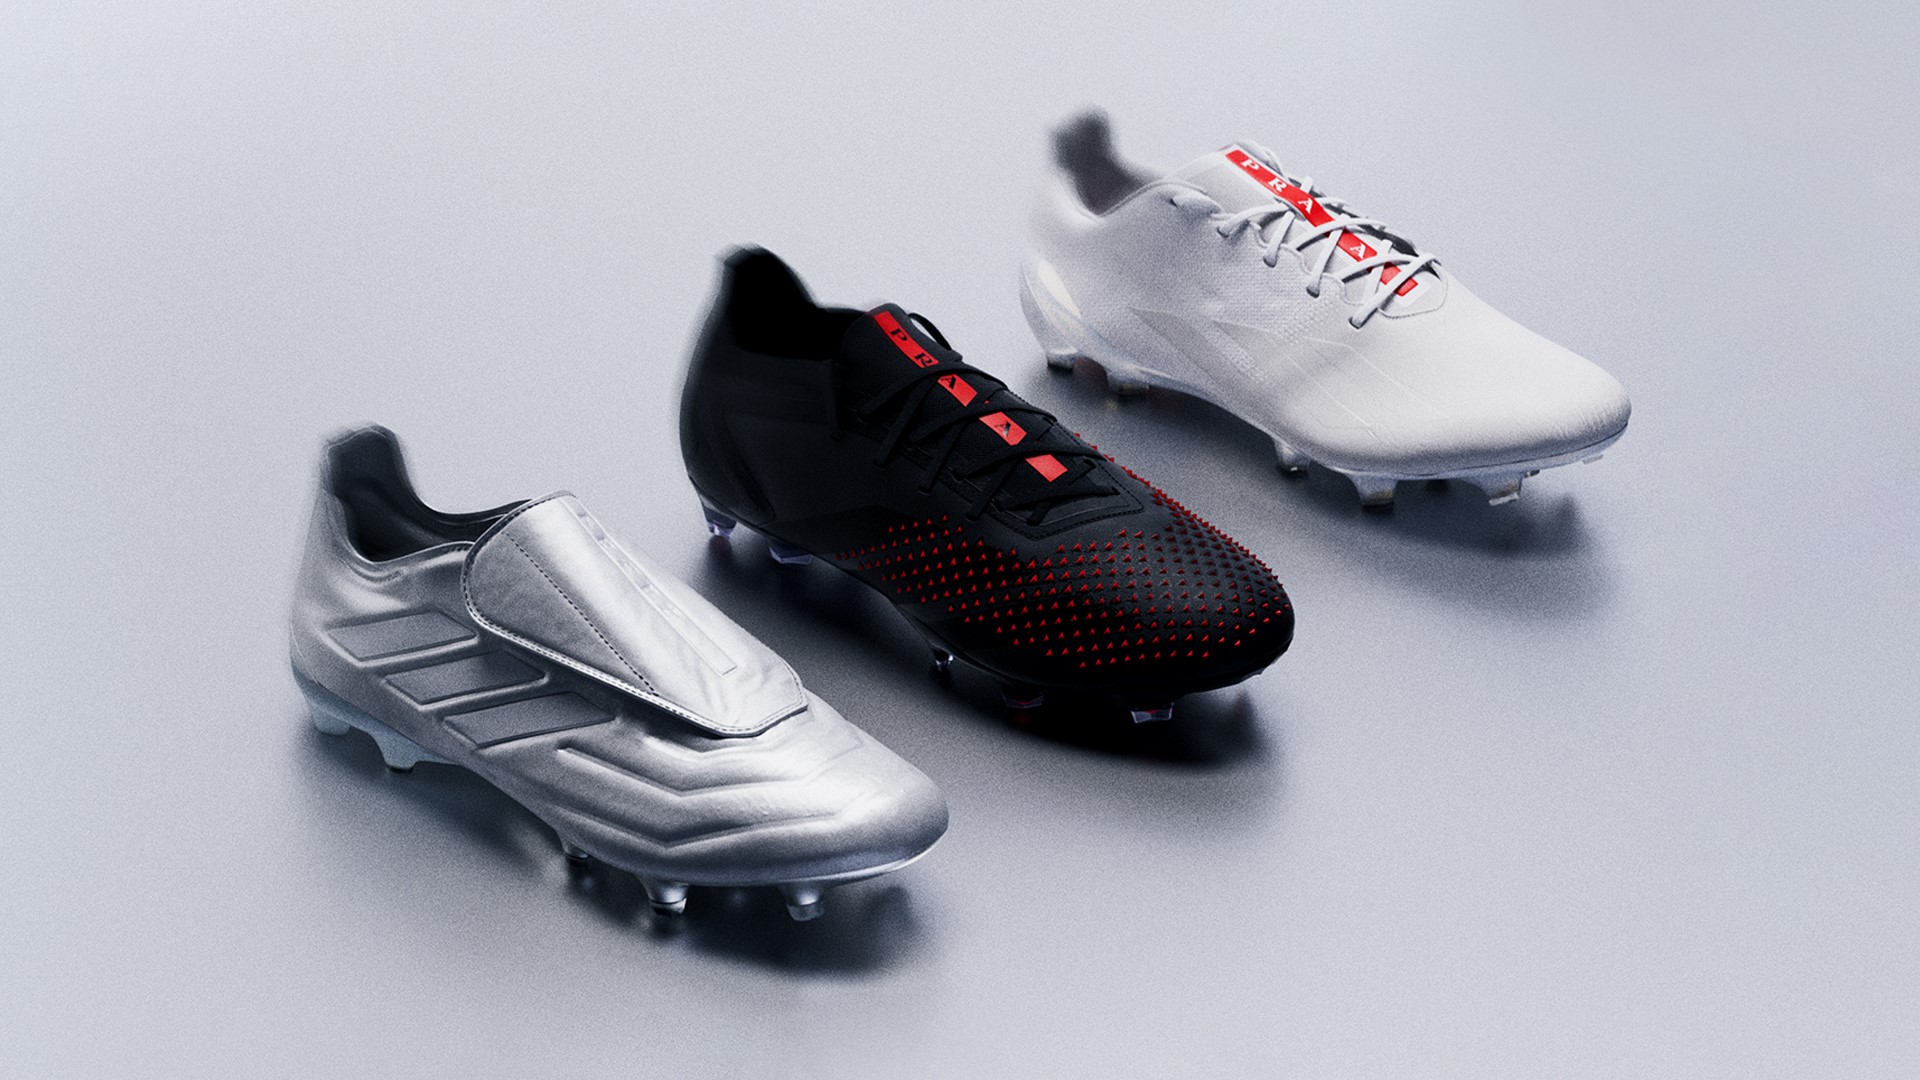 adidas and PRADA Introduce first ever joint Football Boot